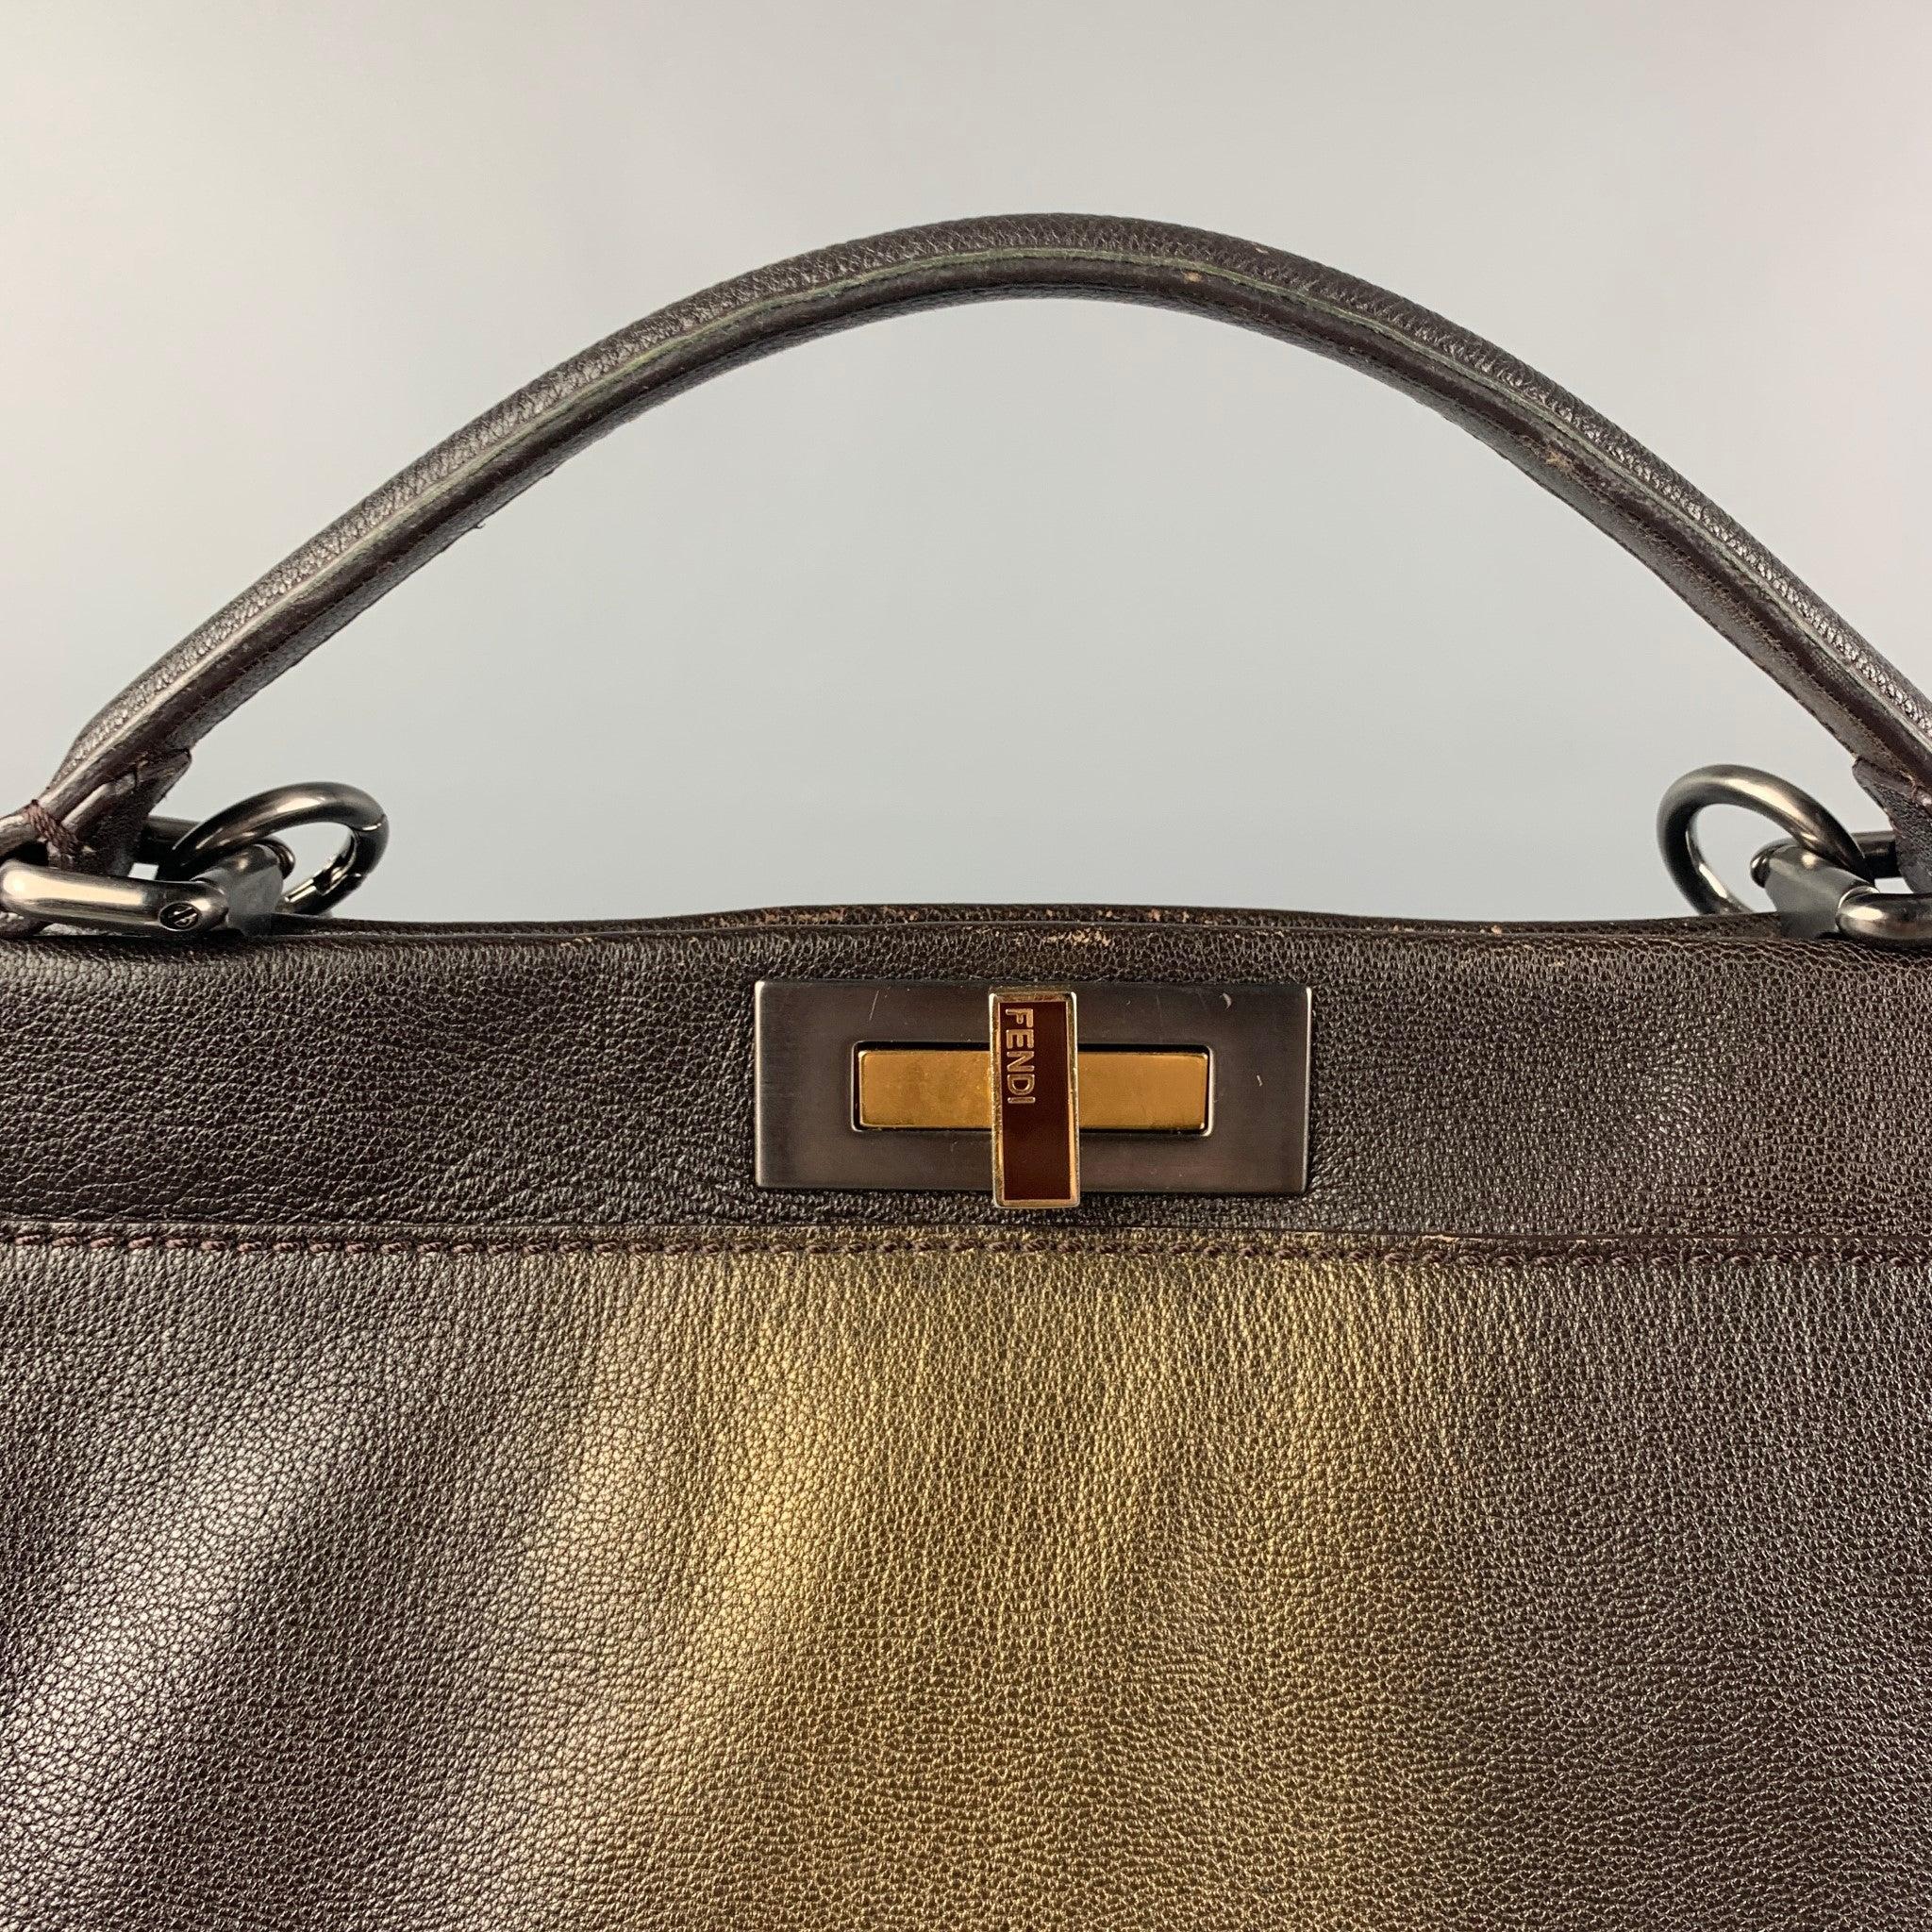 FENID 'Large Zucca Peekaboo'
 2009 bag comes in a brown & gold ombre leather featuring a top handles, detachable shoulder strap, dual compartment, monogram print interior, and a push open closure.
Very Good
Pre-Owned Condition. 

Marked:  